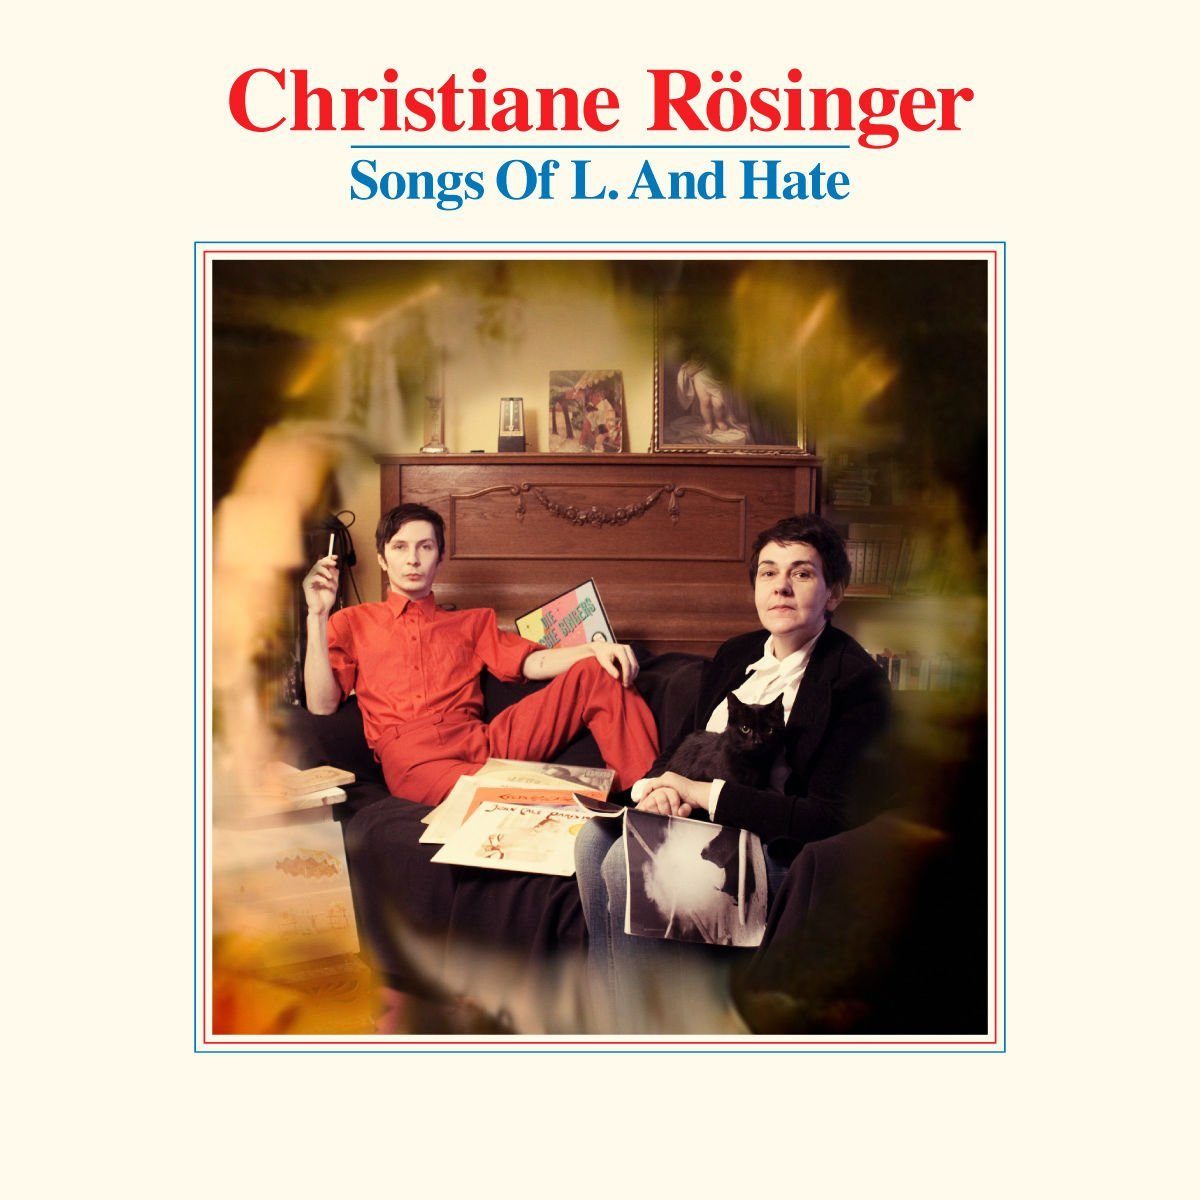 Christiane Rösinger "Songs Of L. And Hate"